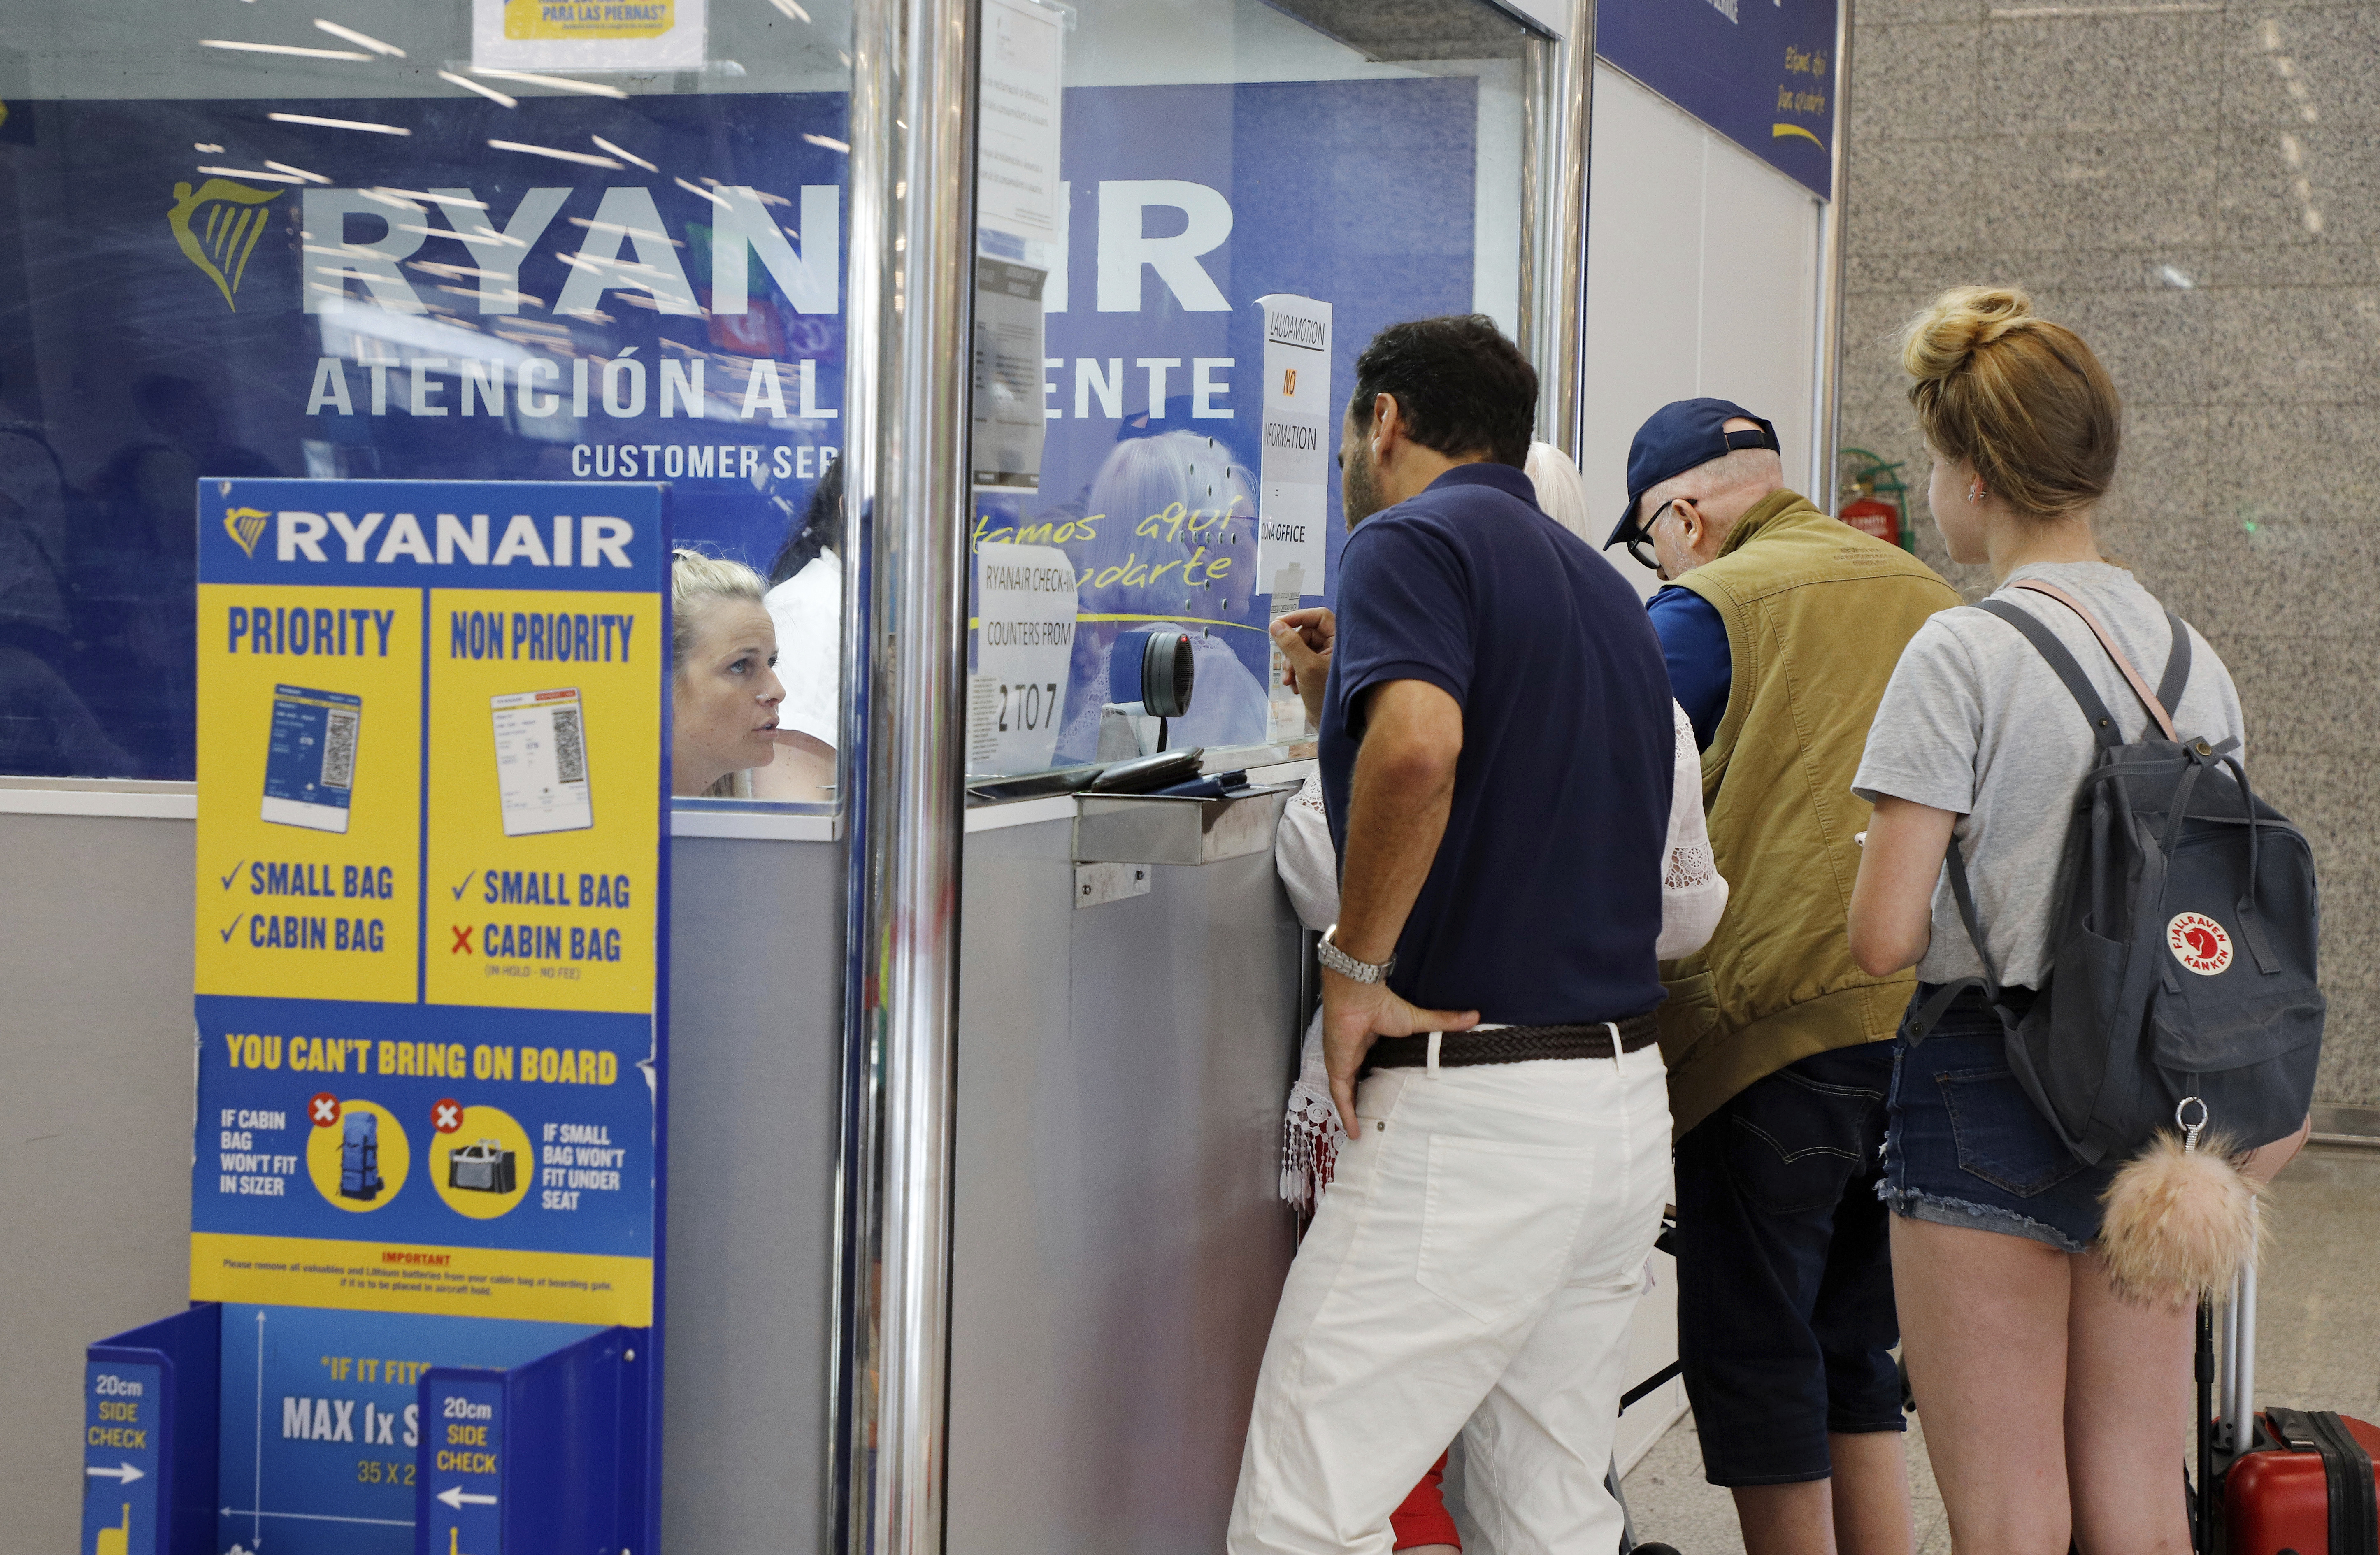 25 July 2018, Spain, Mallorca, Palma: Passengers are queuing up at the Ryanair service desk at Palma de Mallorca airport. The start of a two-day strike by cabin crew at the low-cost airline Ryanair has caused great displeasure among countless travellers in several European countries. The highest number of cancellations occurred in Spain, when Ryanair cancelled 200 flights. In Mallorca alone, 72 flights were cancelled among which 10 were to Germany, on July 25, 2018. Photo by: Clara Margais/picture-alliance/dpa/AP Images